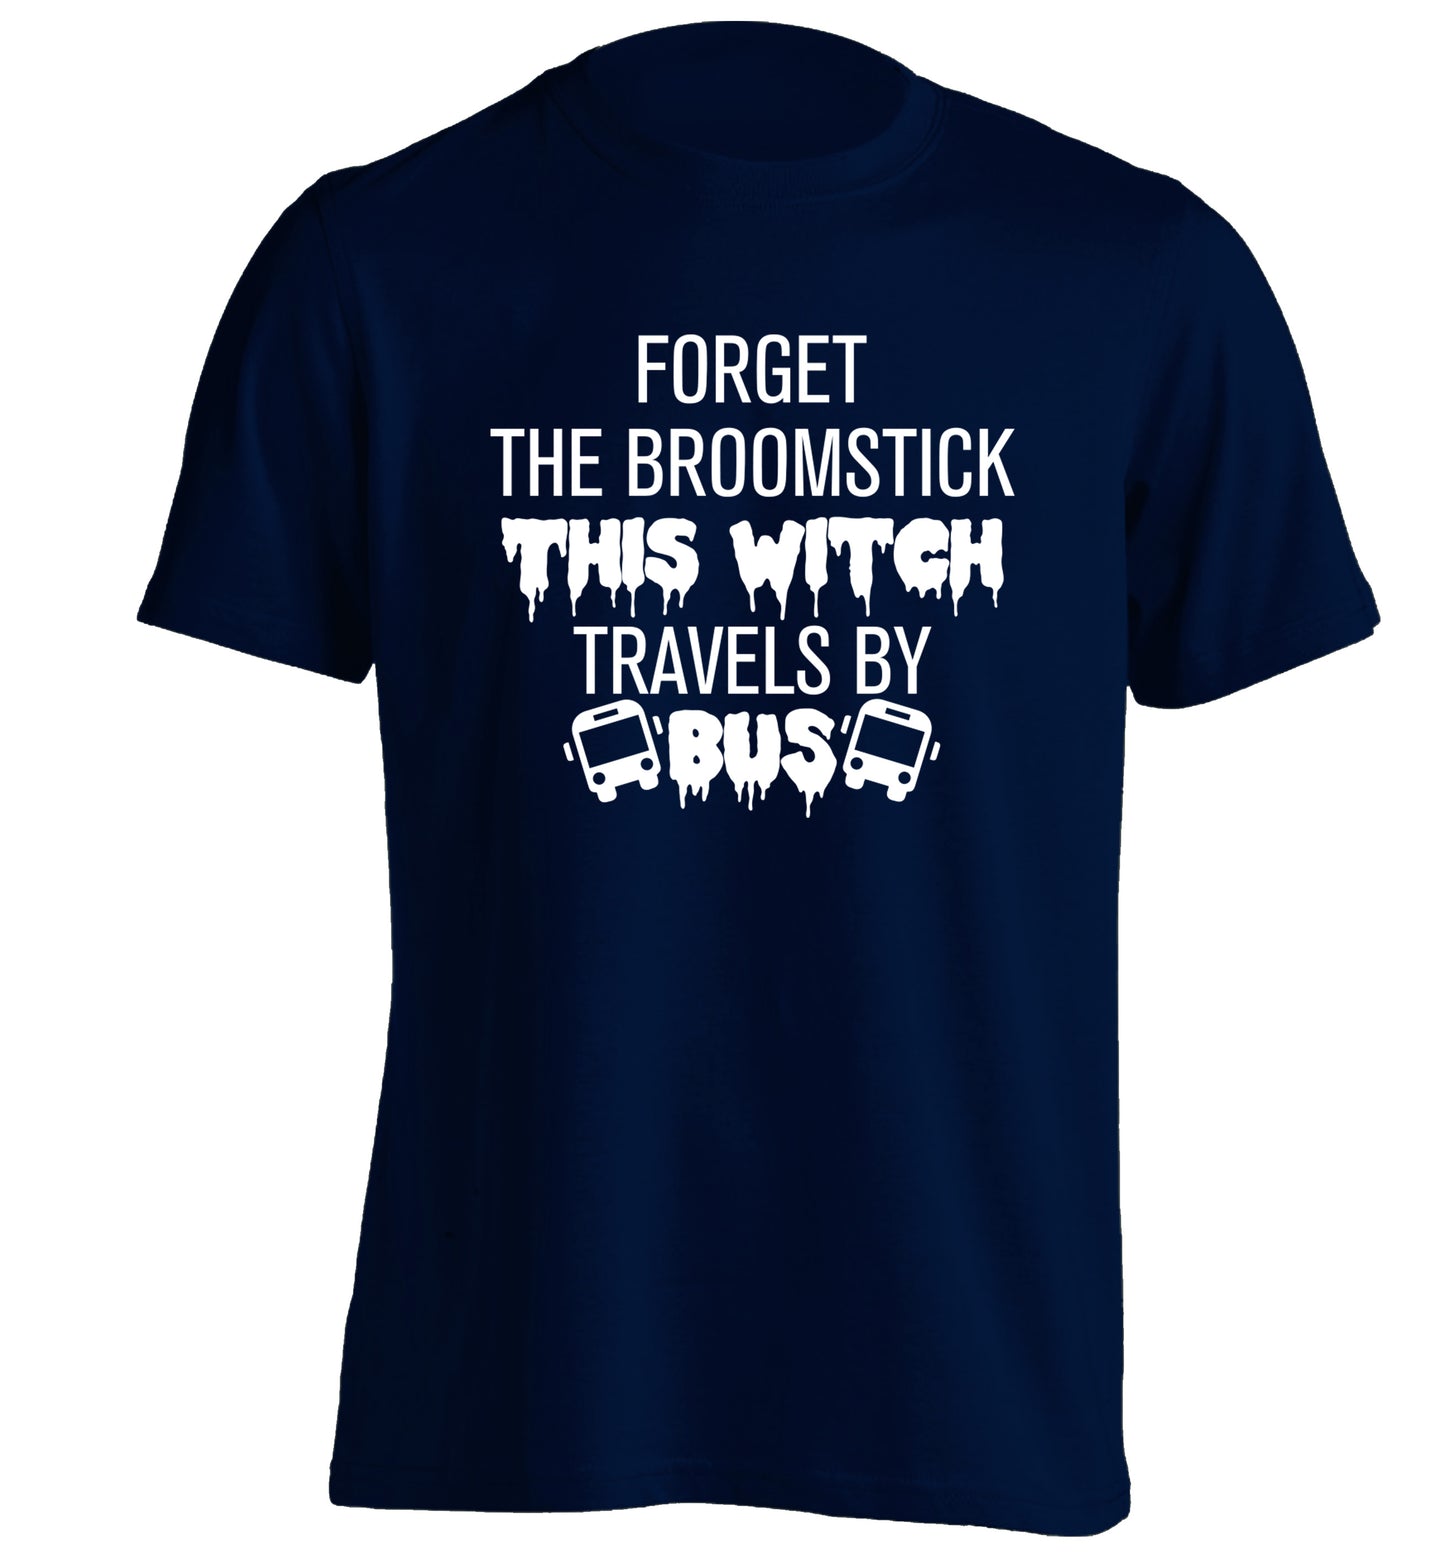 Forget the broomstick this witch travels by bus adults unisexnavy Tshirt 2XL